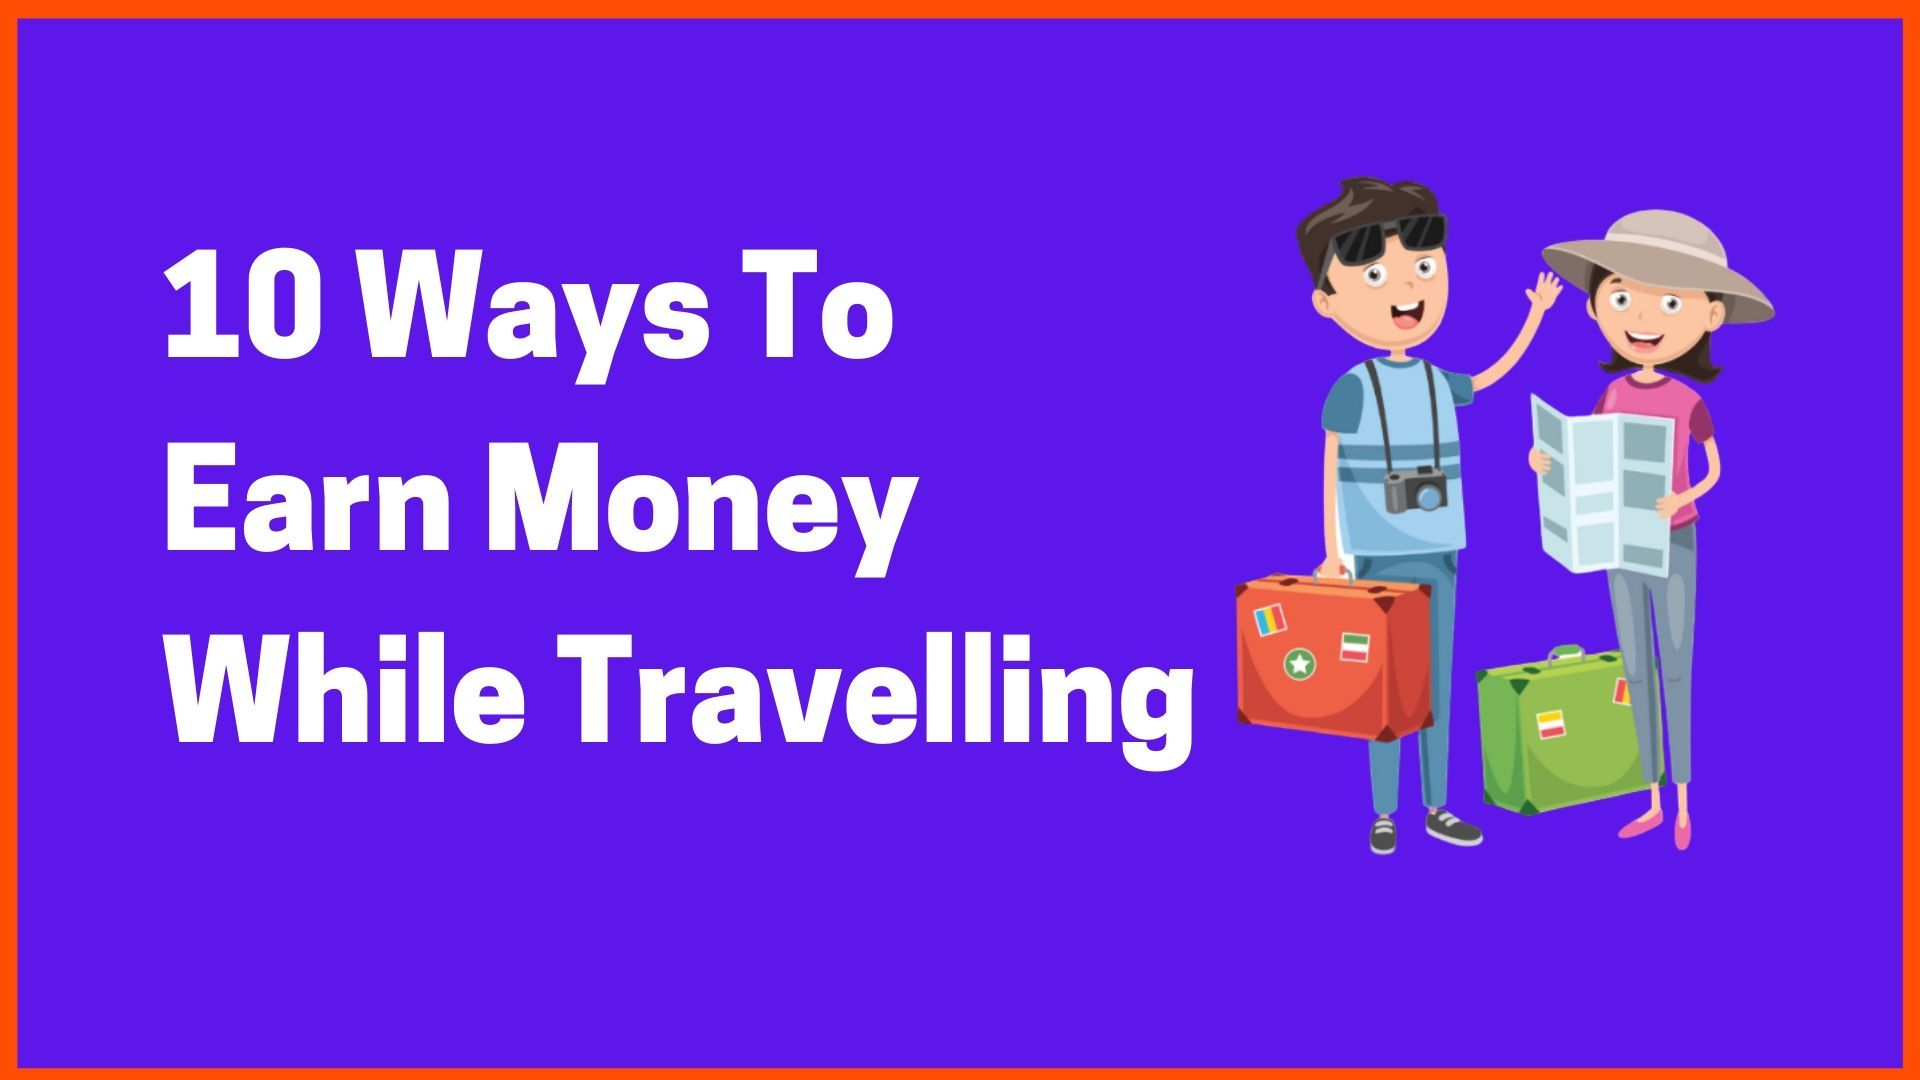 10 Ways To Earn Money While Travelling